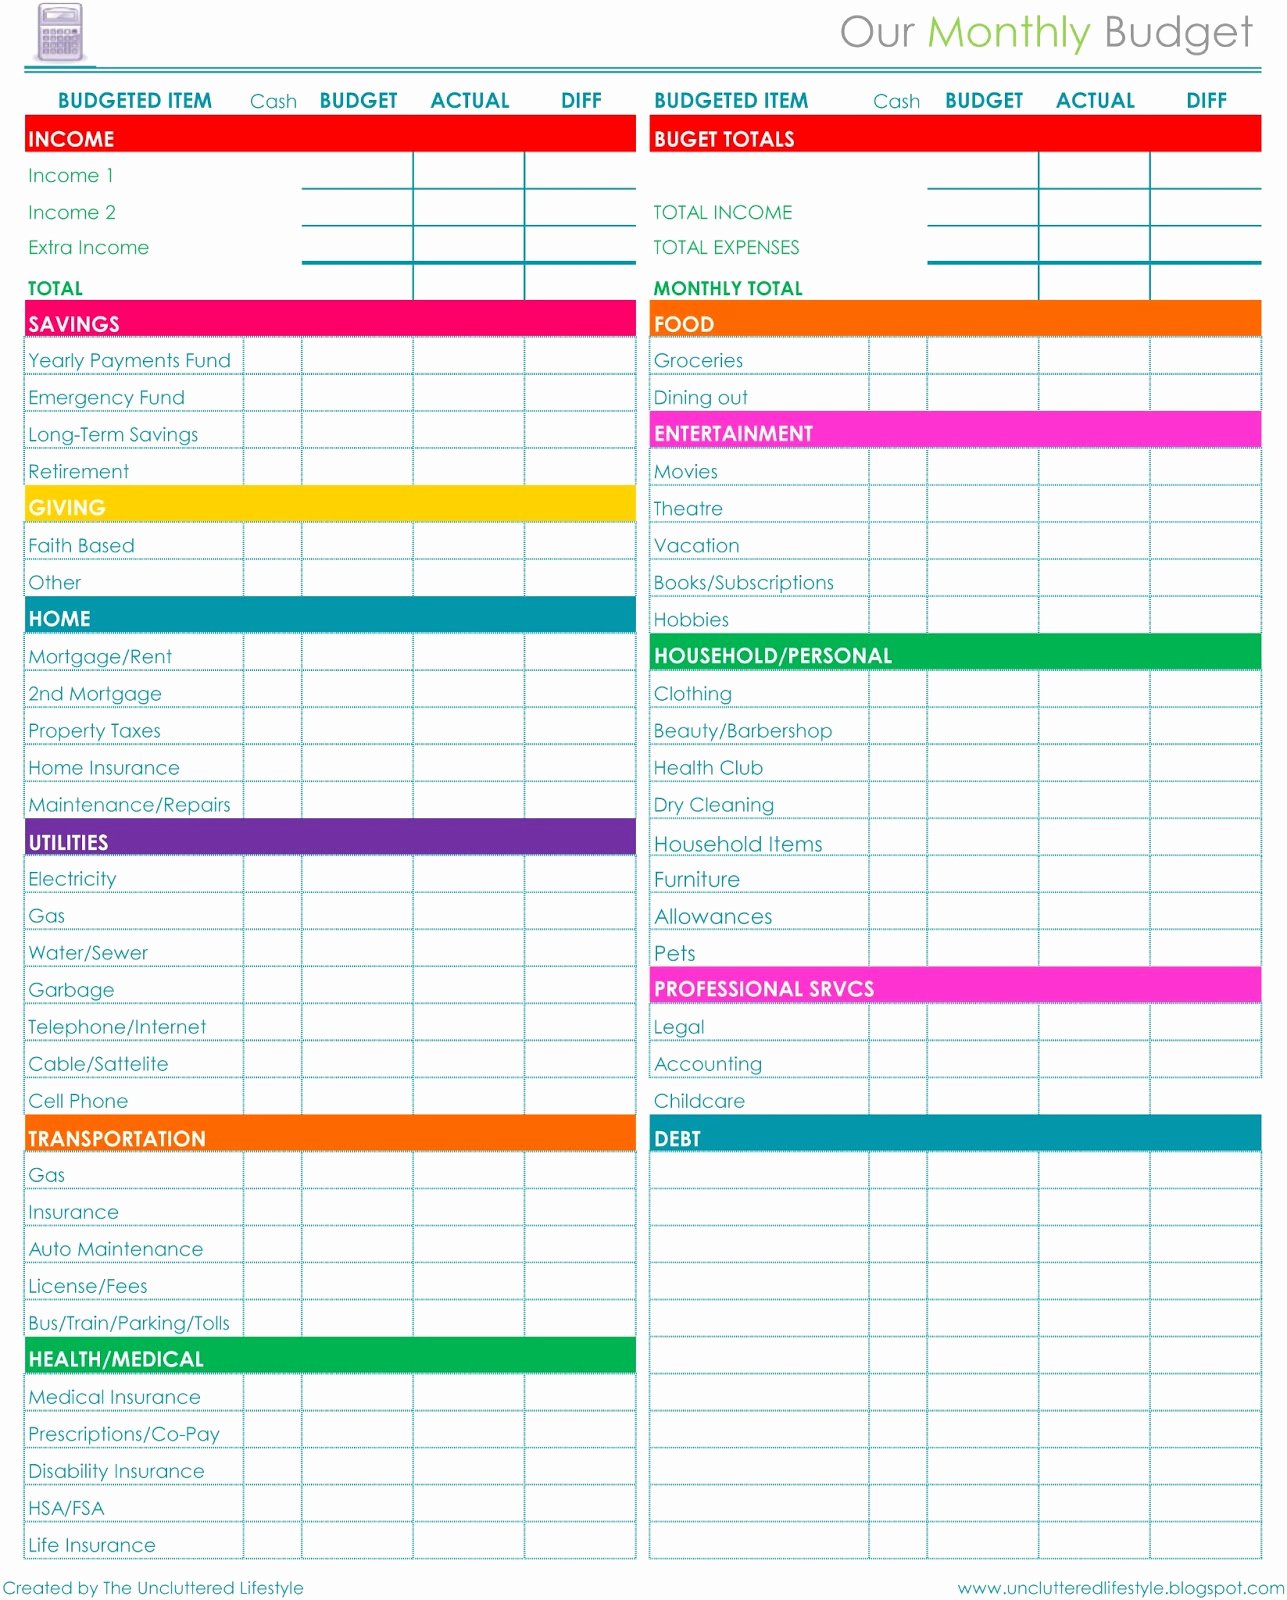 Monthly Budget Excel Spreadsheet Template New How I Keep the House Running Part 2 Find Lifestyle